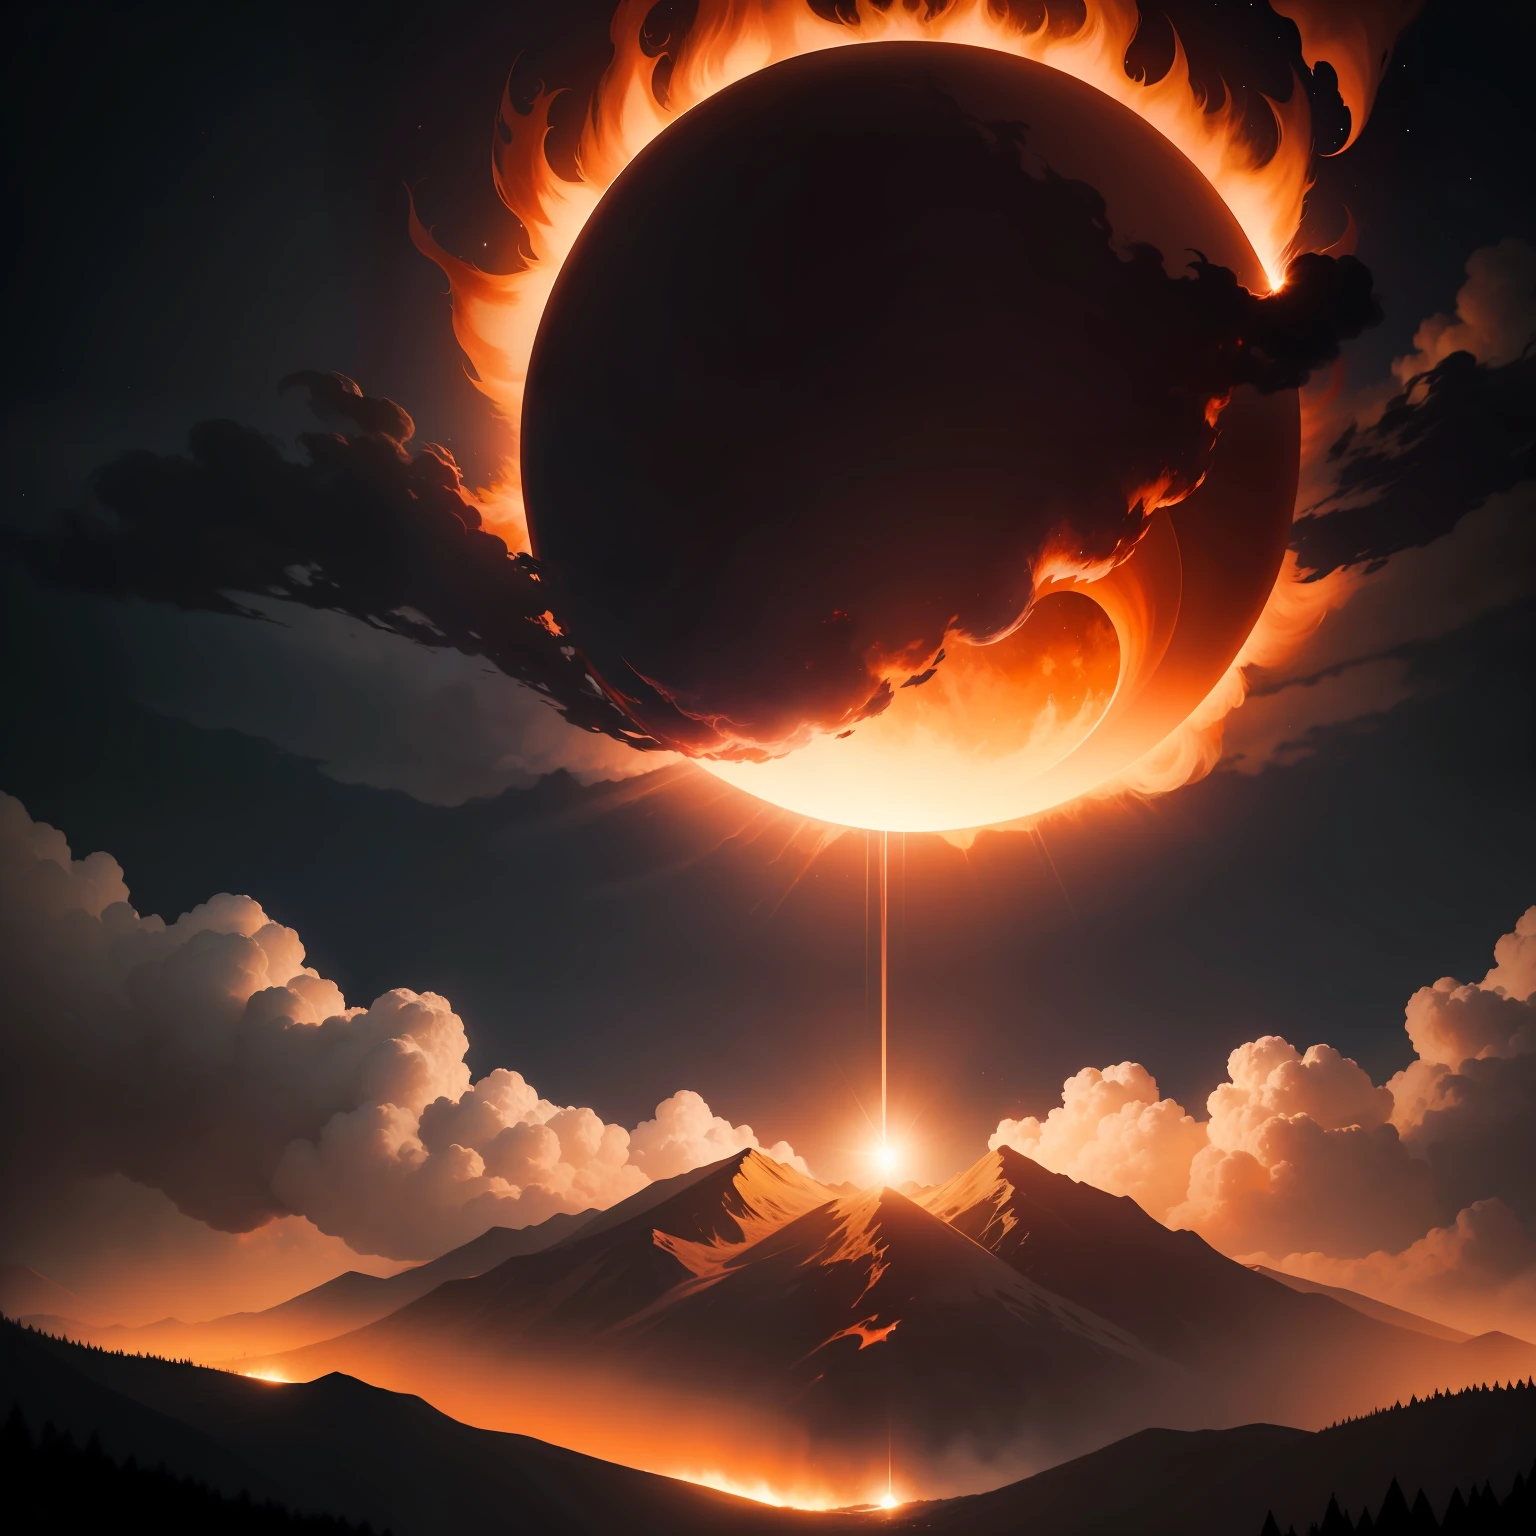 Natural disaster views，The eclipse is surrounded by roaring flames